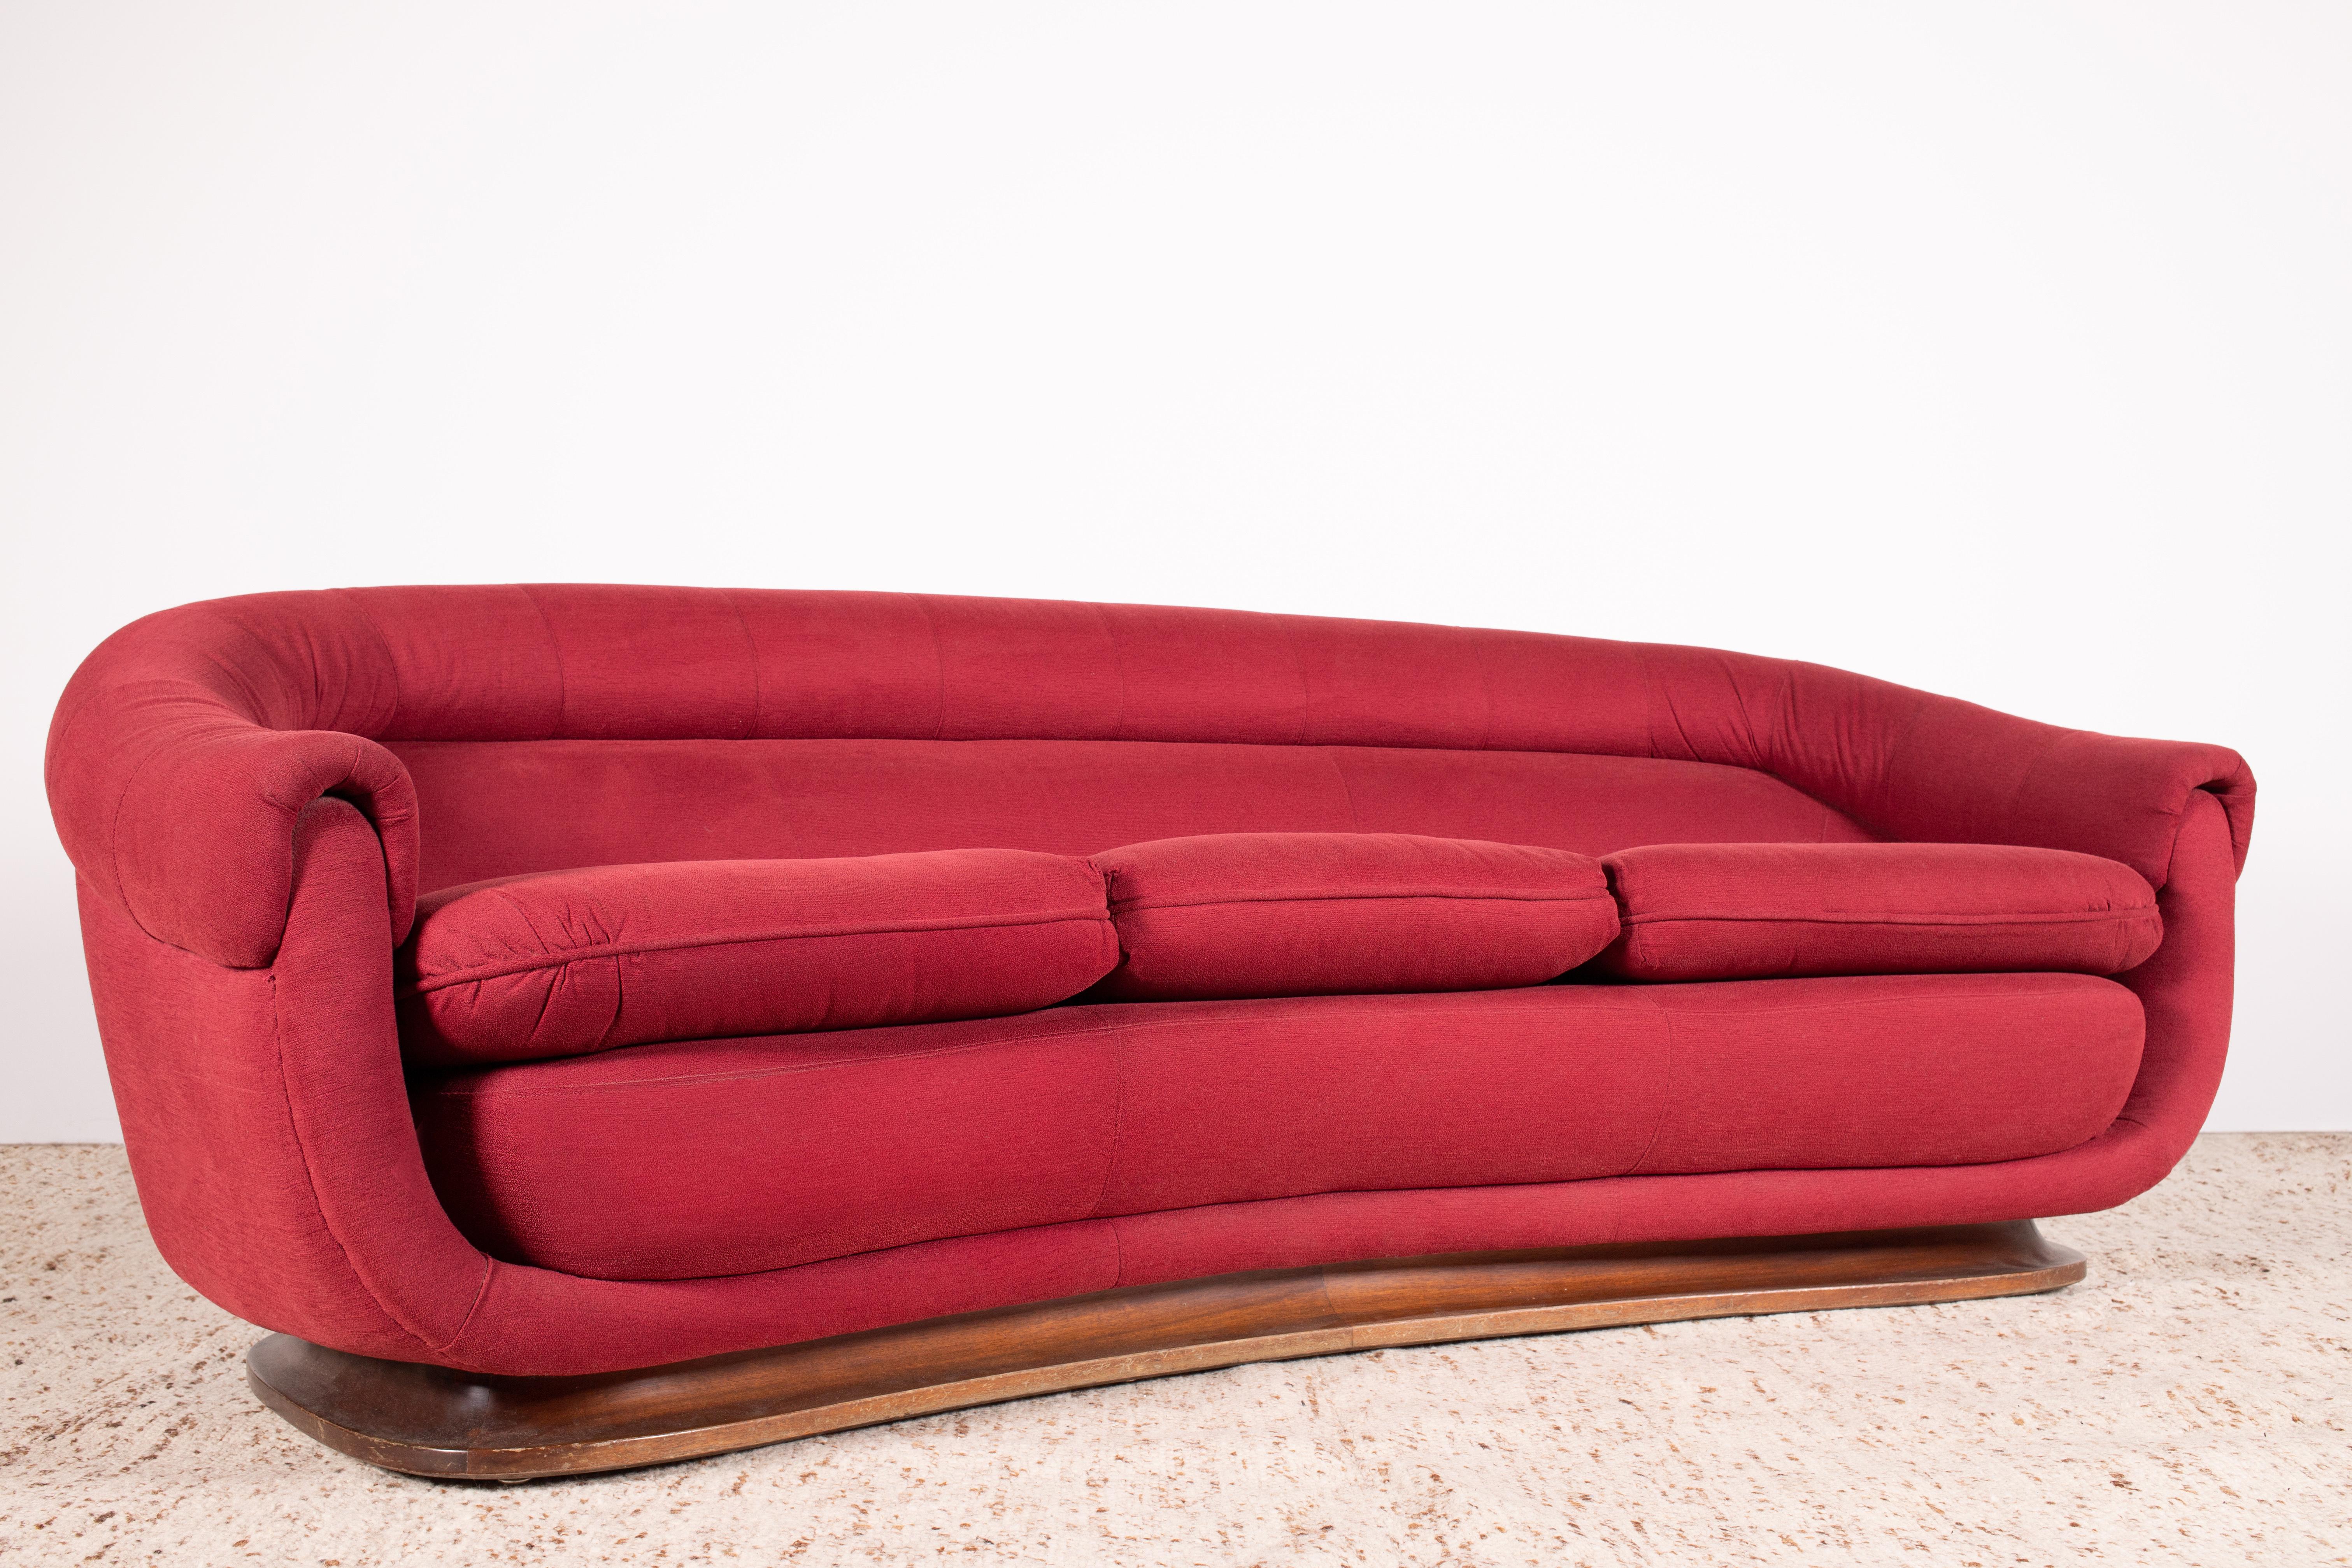 Organique The Moderns Modernity Italian Curved / Crescent 3-Seat Sofa in Red Fabric & Walnut des années 1950 en vente